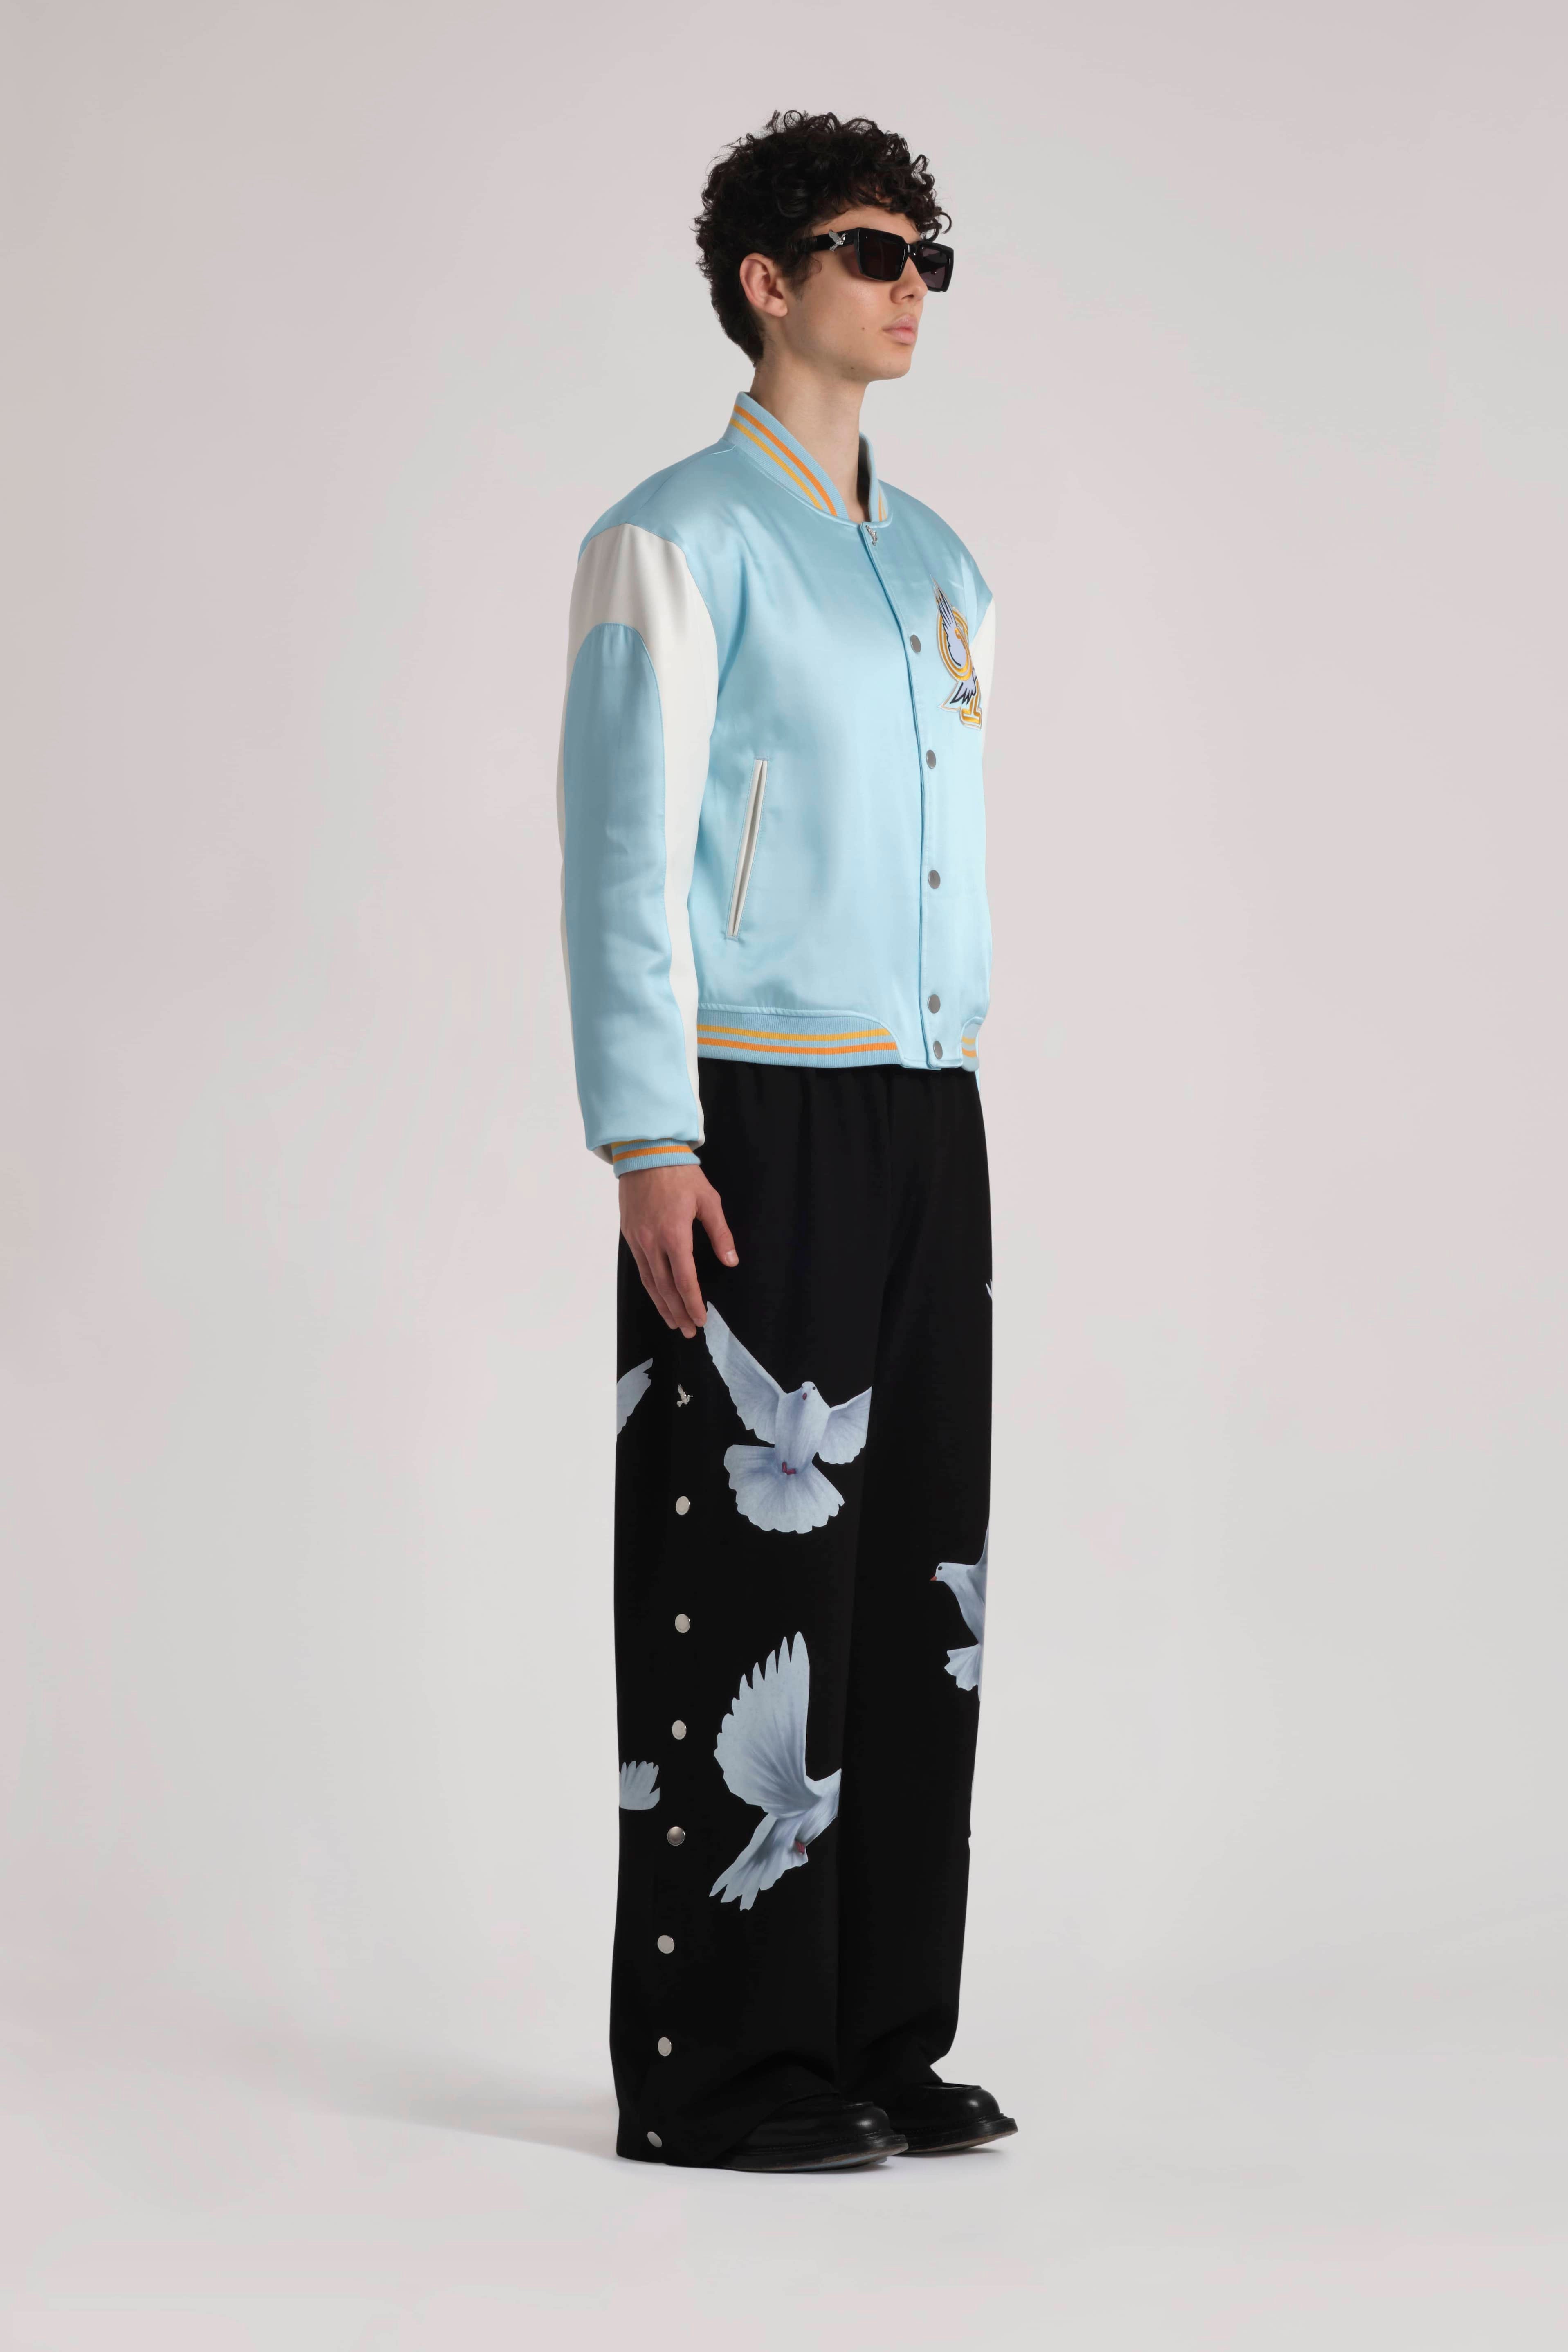 Freedom Doves Trackpants